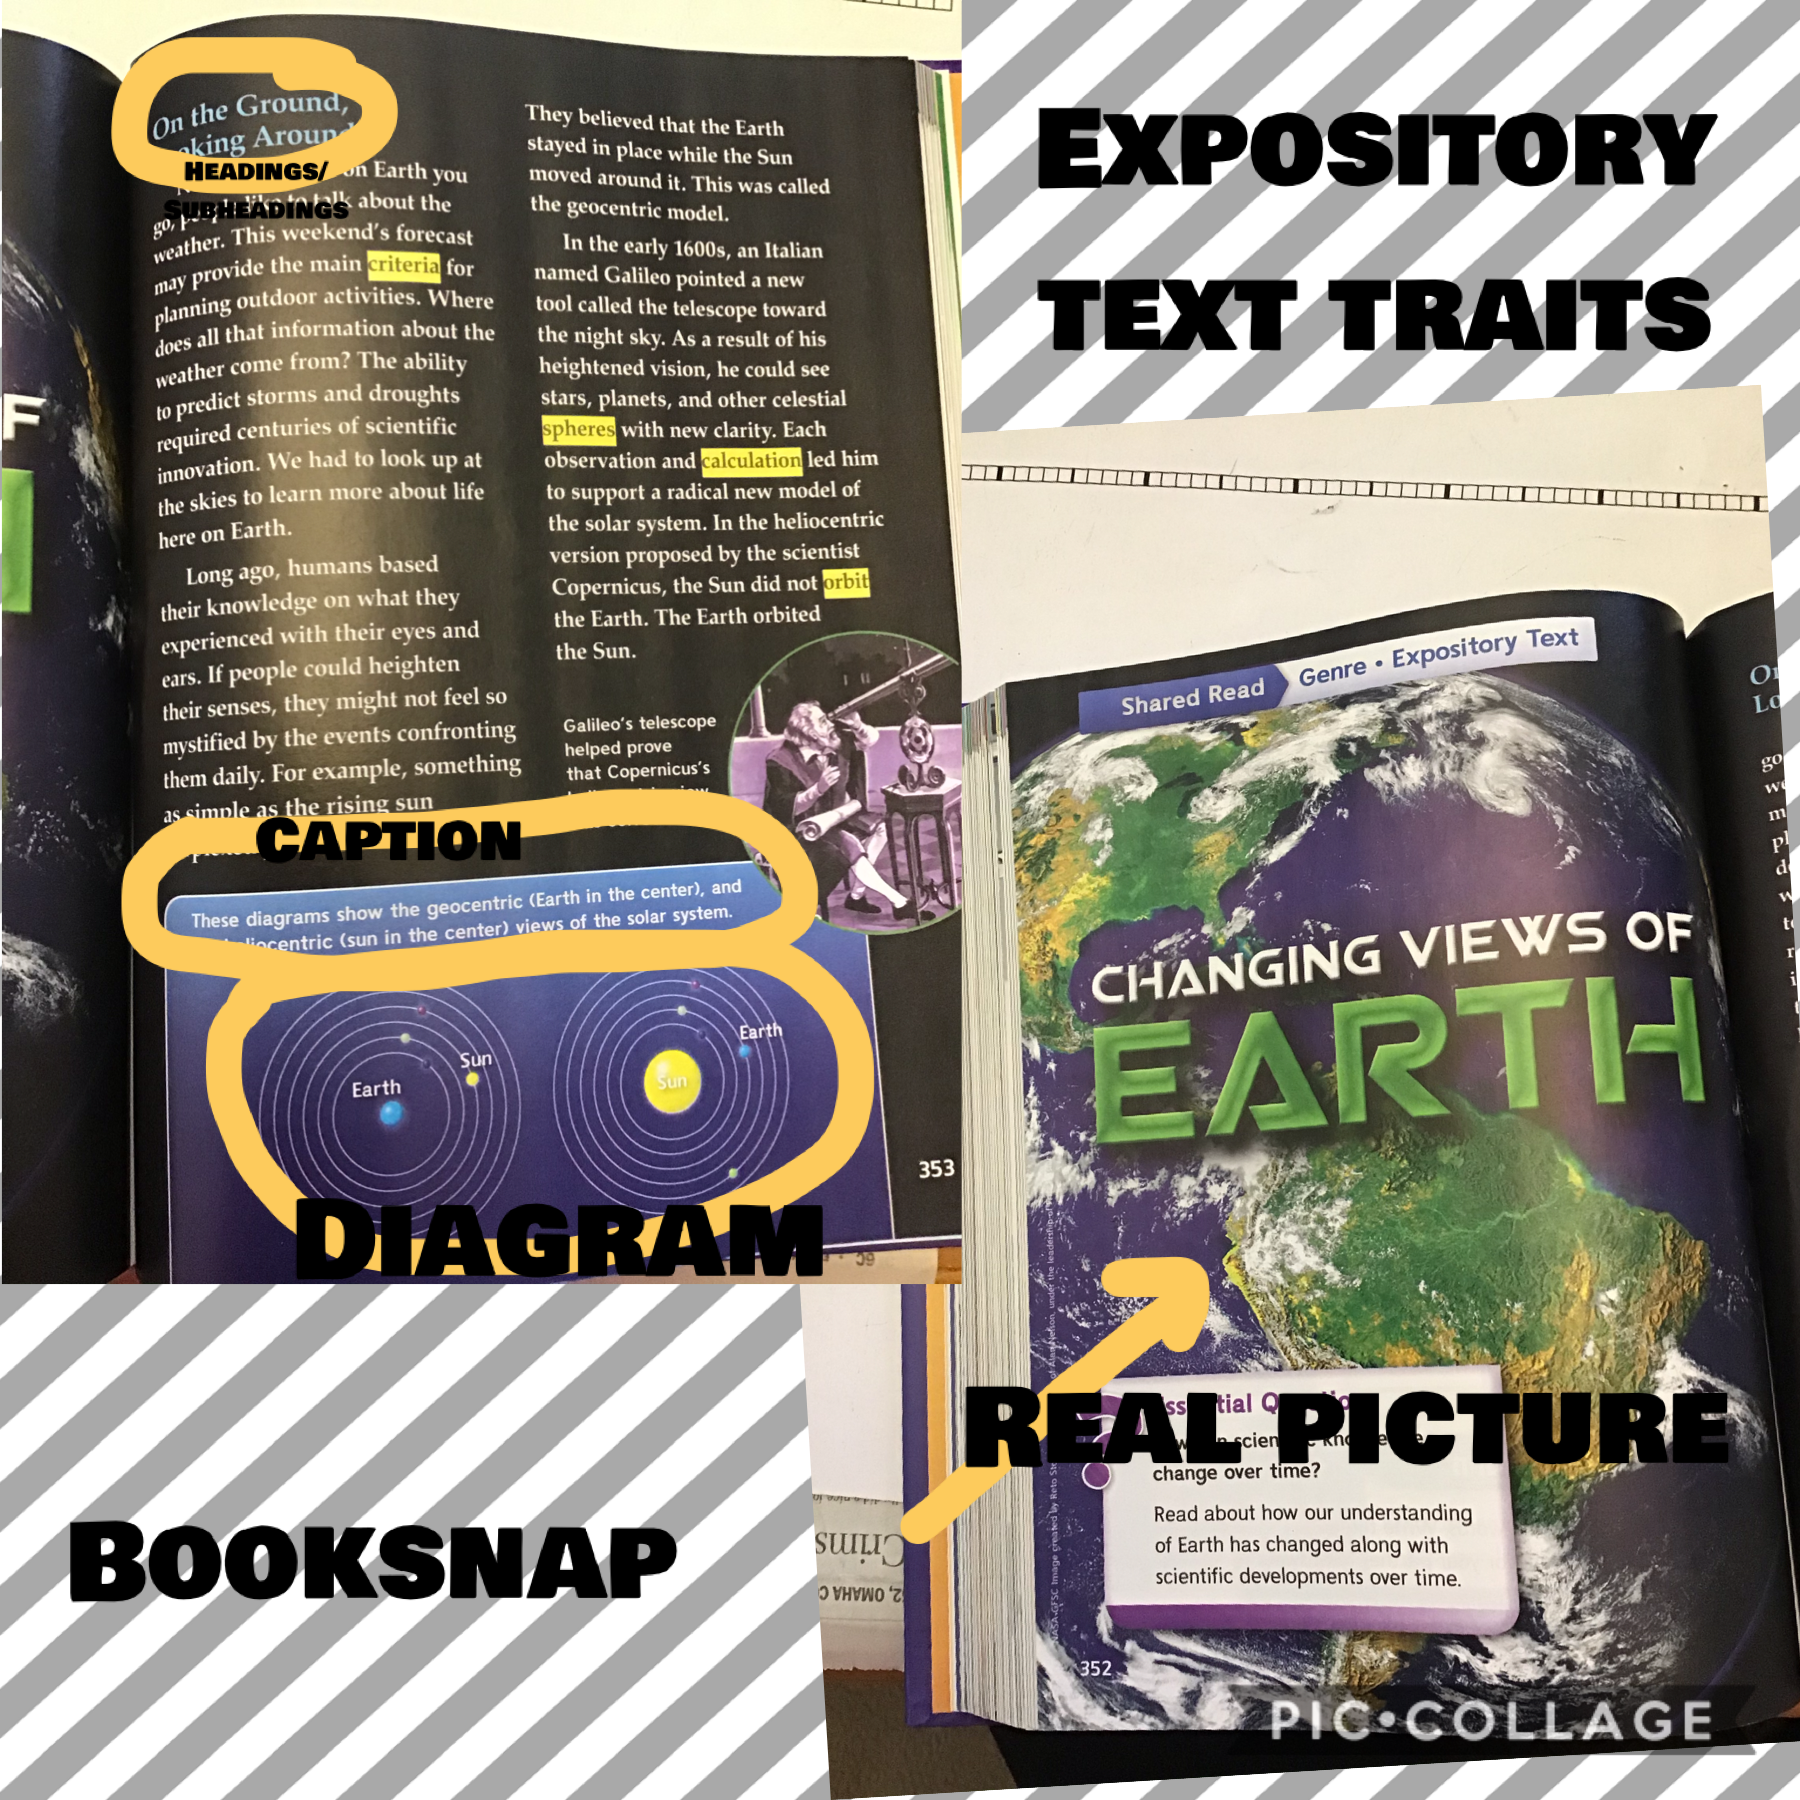 I am now starting my own remote learning pic collage series to help those who meed some advice in school!
This is how to find if texts are expository text! Enjoy!
#CareForEachother! 